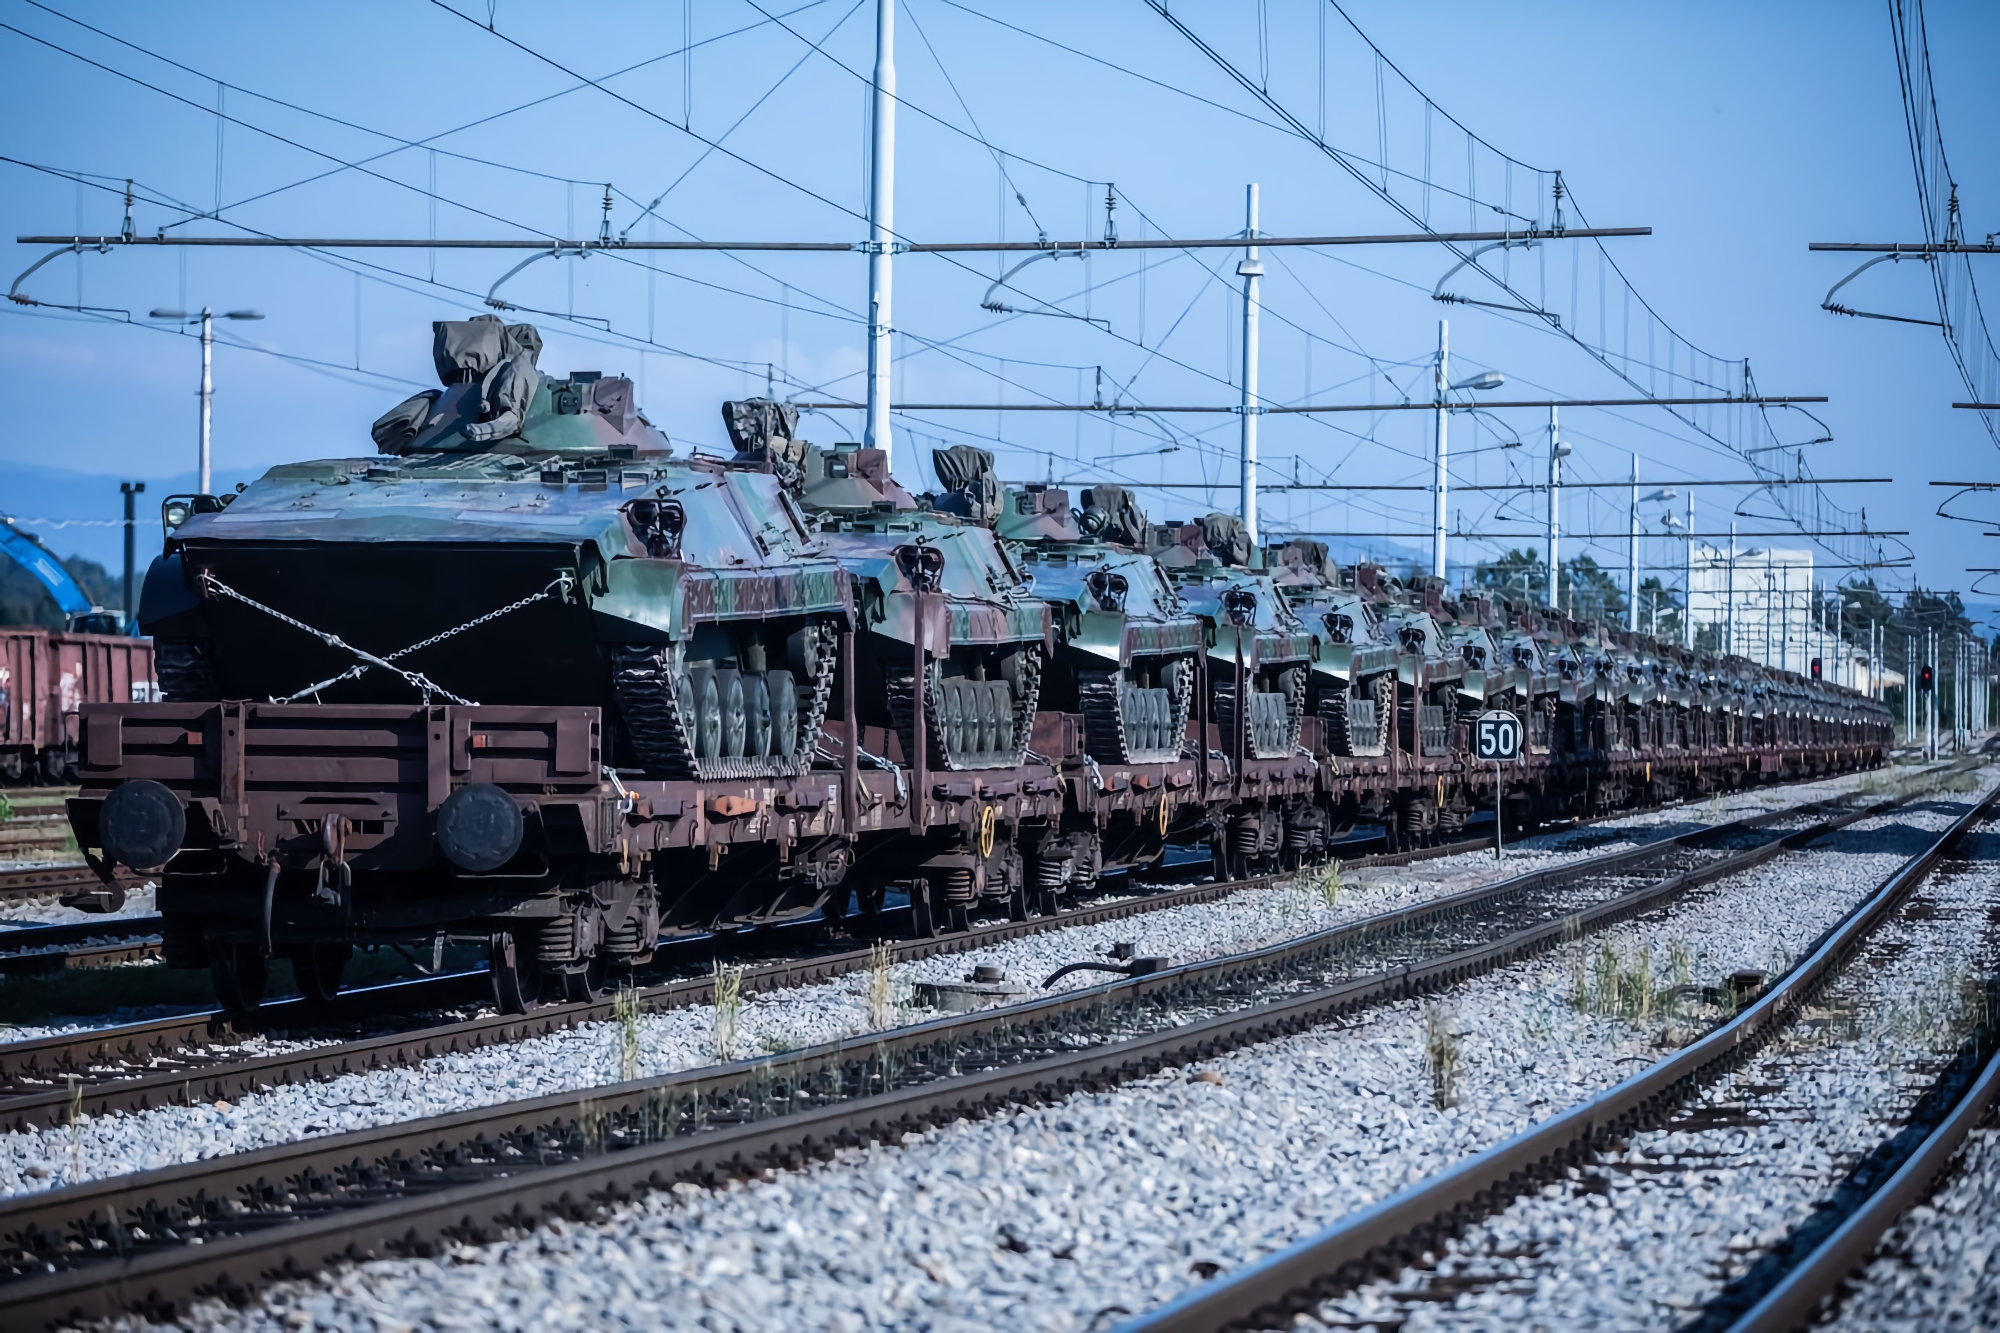 Slovenia handed over 35 M-80A infantry fighting vehicles to Ukraine: we tell you what kind of infantry fighting vehicle it is